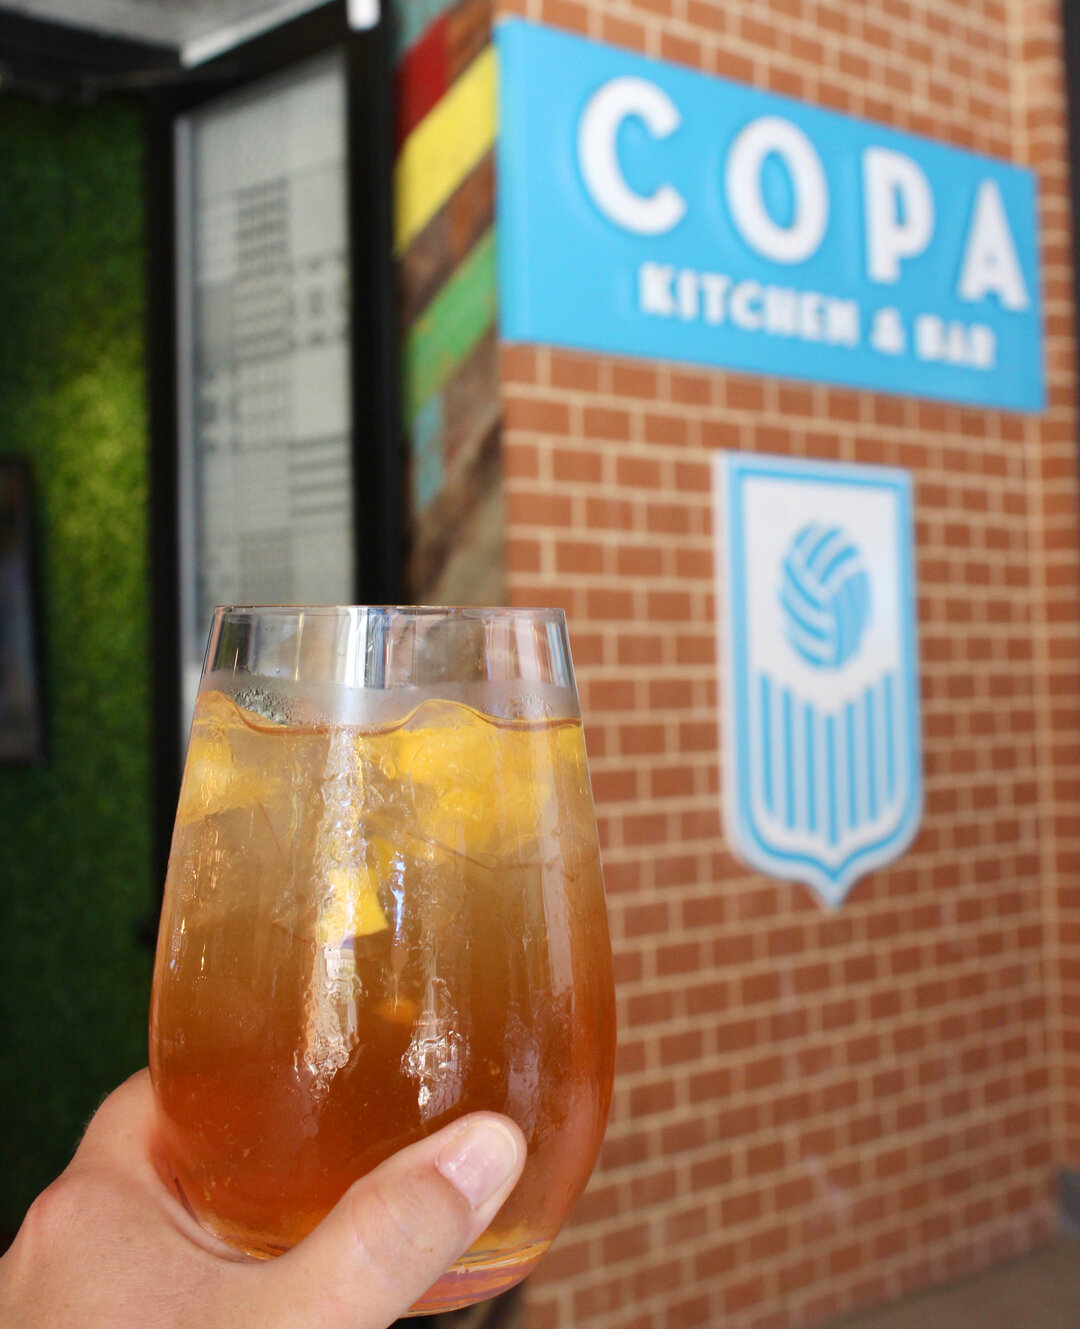 Just here for the BOO-ze 👻.⠀⠀⠀⠀⠀⠀⠀⠀⠀
⠀⠀⠀⠀⠀⠀⠀⠀⠀
Don&rsquo;t miss out on our final days, come grab a sangria on our patio this weekend.